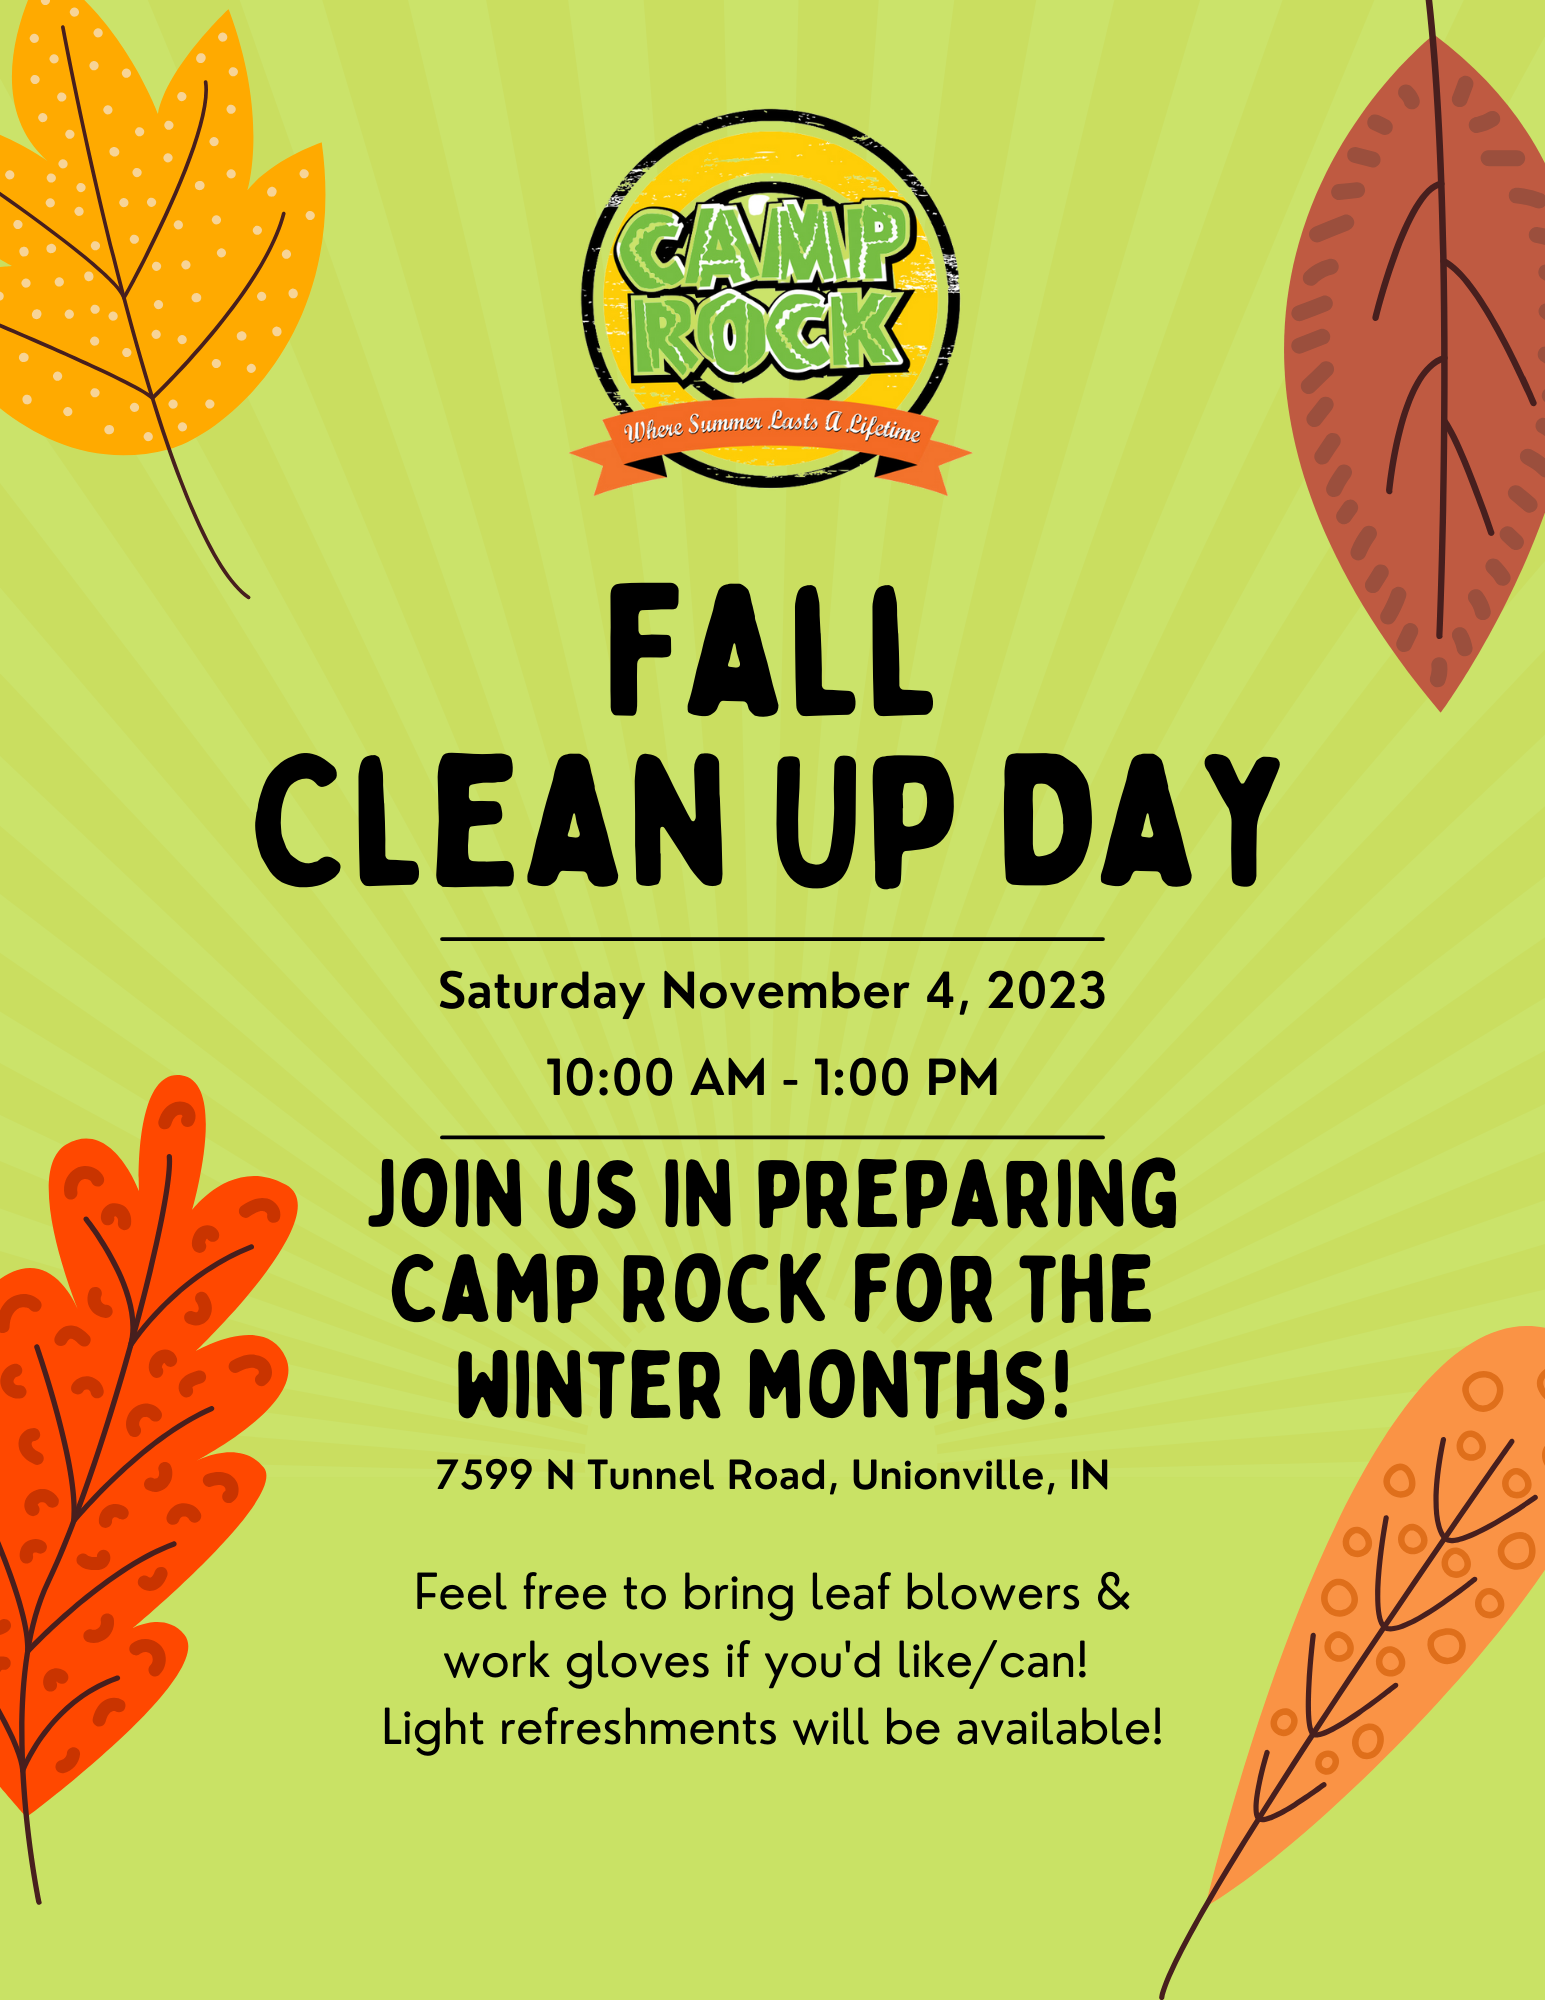 CR23 Fall Clean Up day